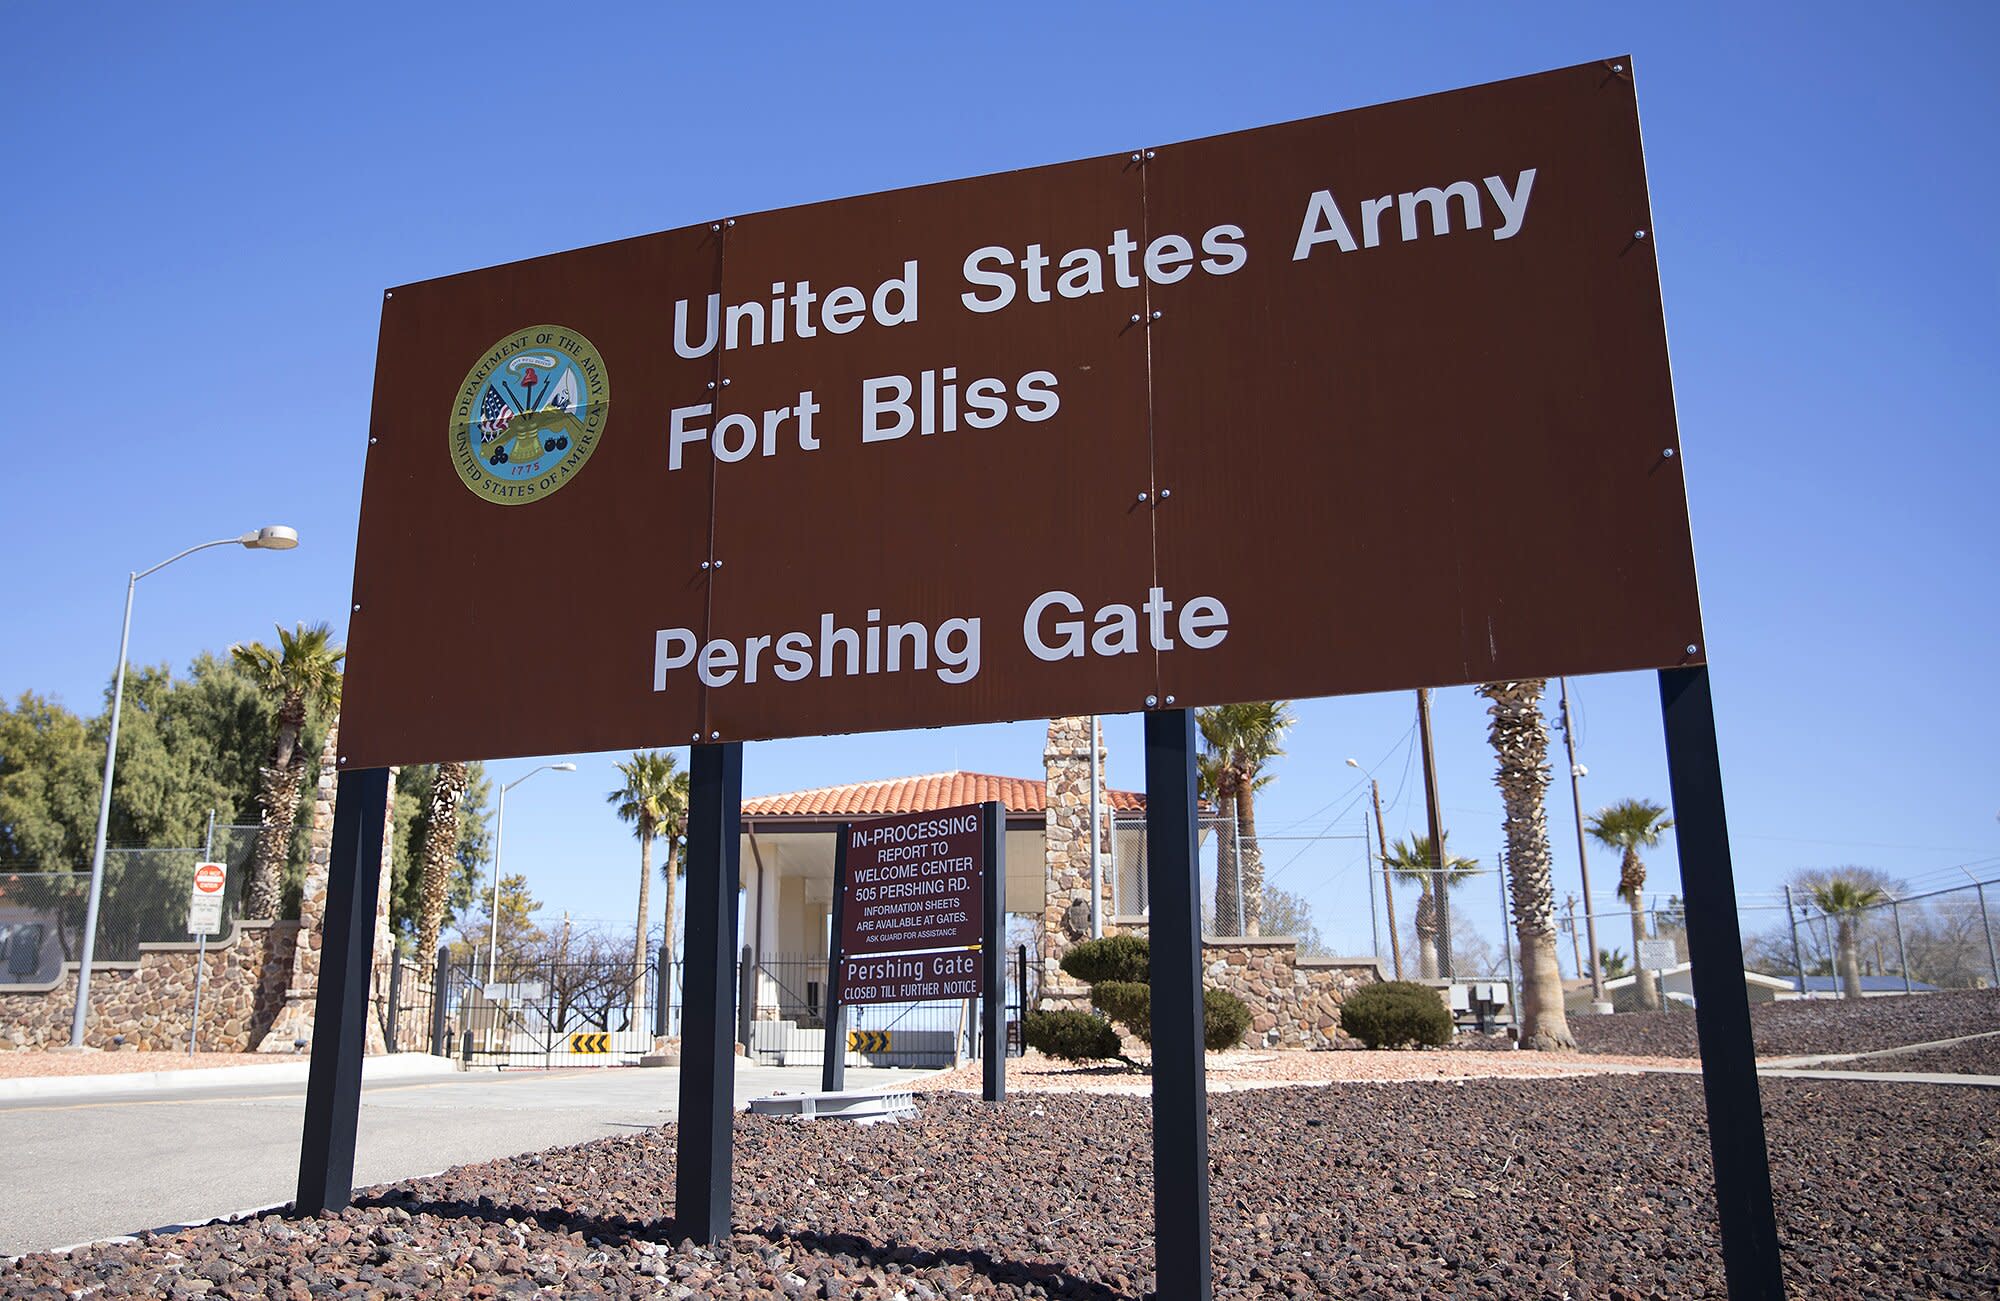 11 Soldiers Injured After Ingesting An Unknown Substance In Training Fort Bliss Says - roblox law enforcement training campus leaked